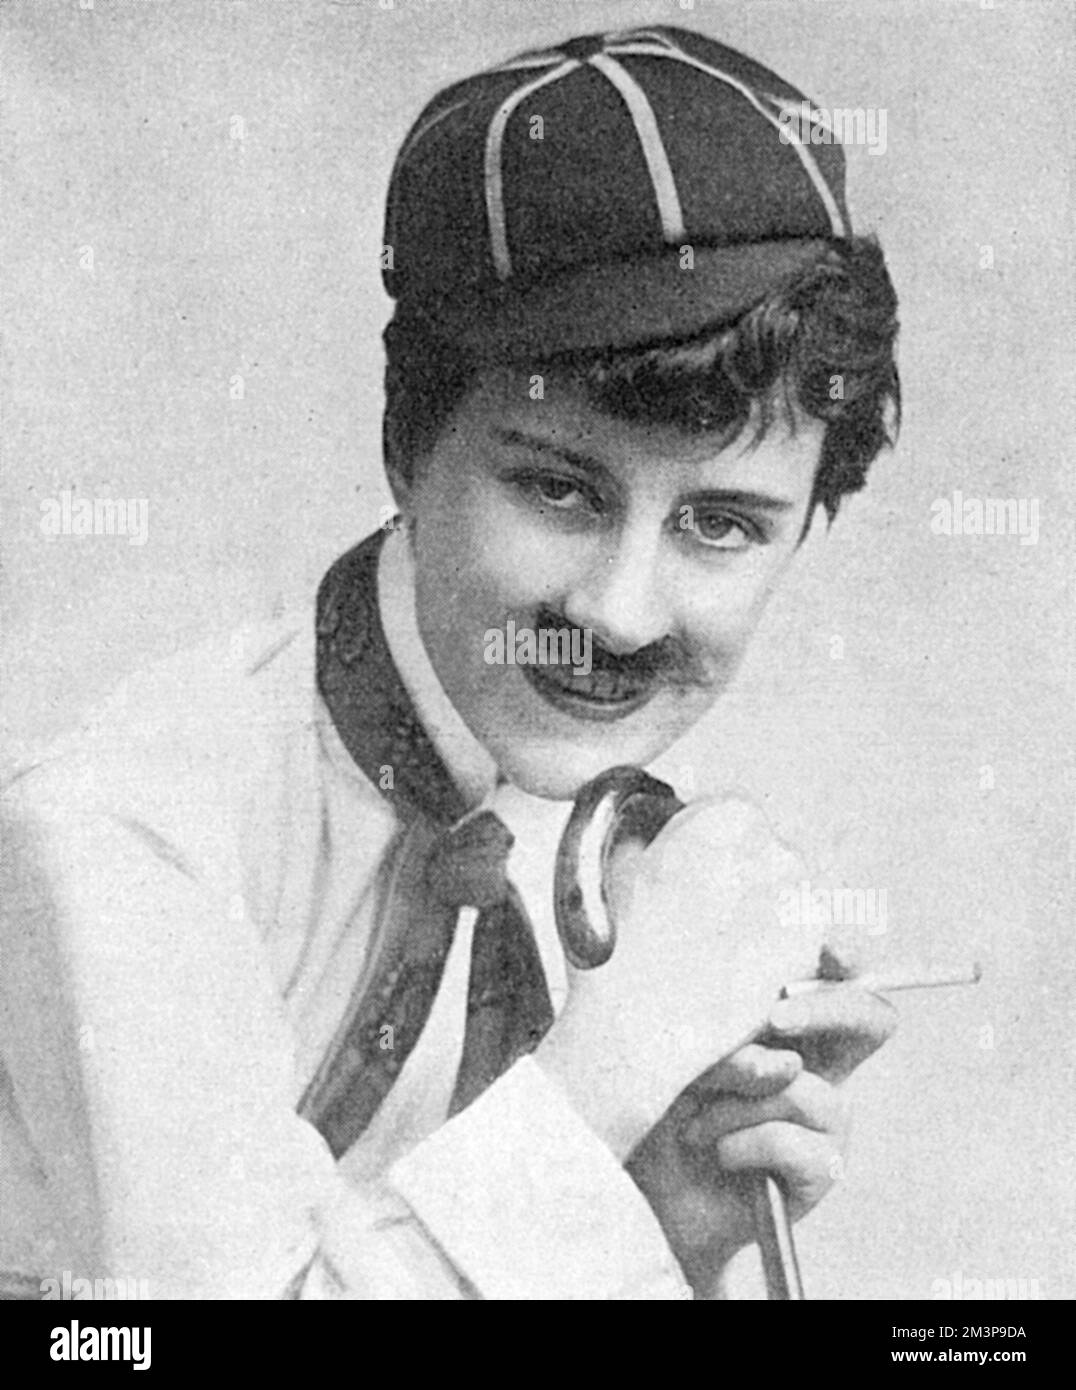 Beatrice Lillie (1894 - 1989) British actress, later Lady Peel after she married Robert ('Bobbie') Peel, who succeeded to his father's baronetcy in 1925.  Pictured early in her career dressed up as Charlie Chaplin, the 'Cinema King' in the new Vaudeville revue, Tabs.     Date: 1918 Stock Photo